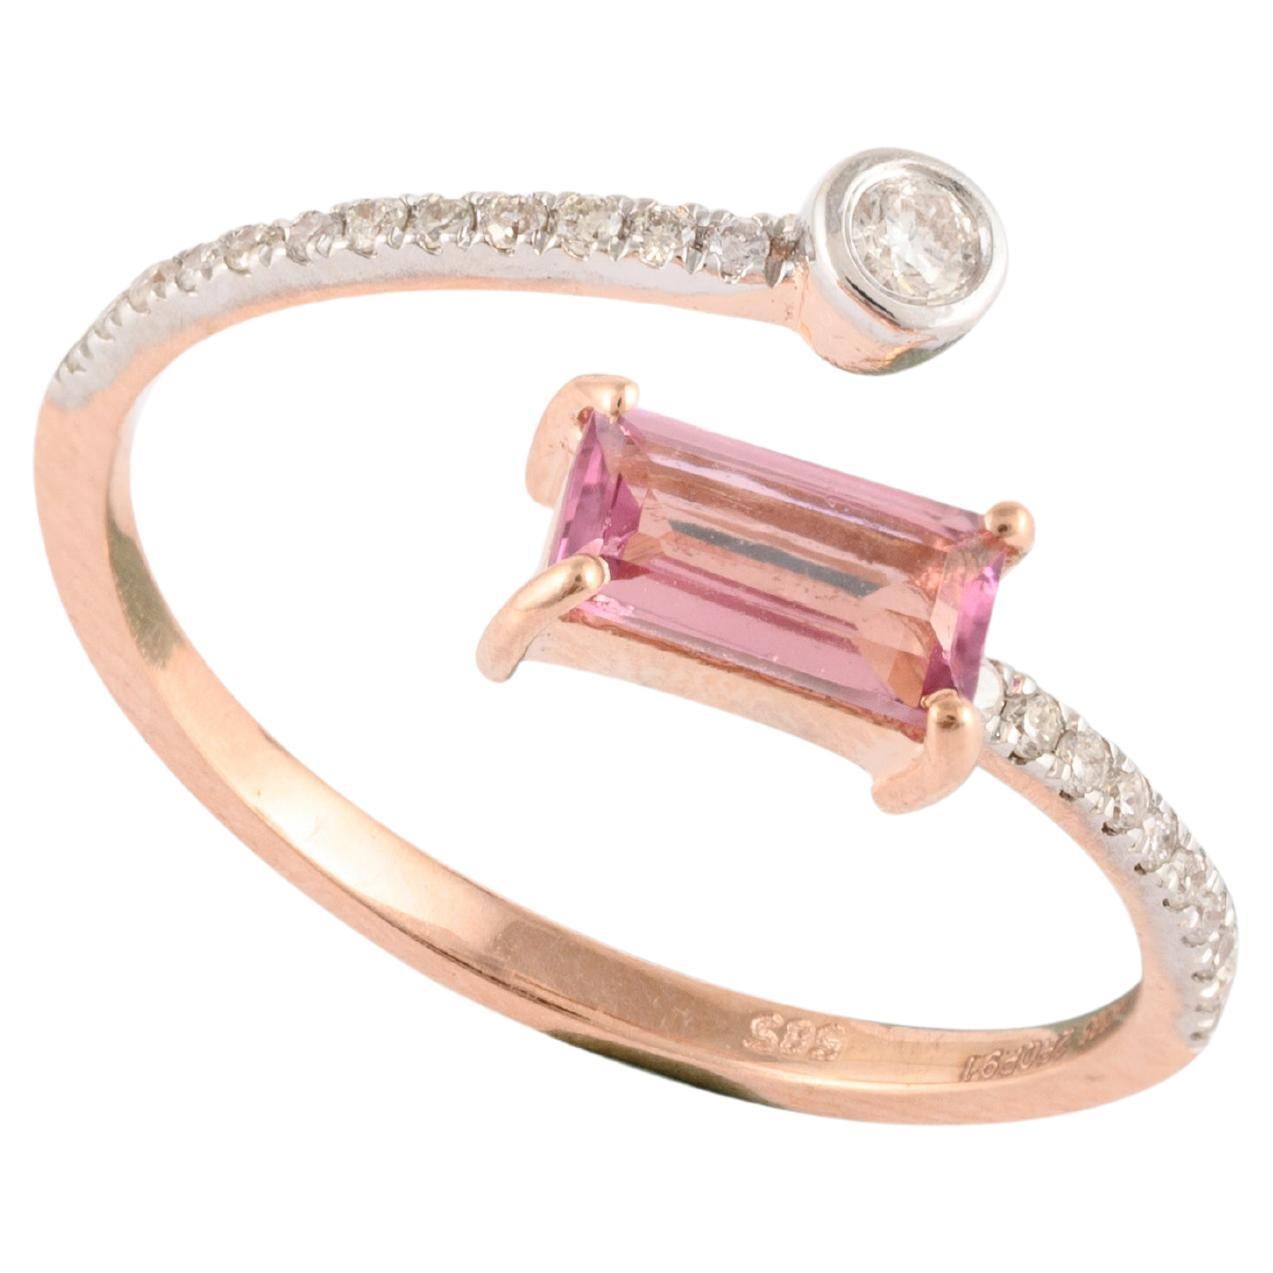 For Sale:  14k Solid Rose Gold Diamond and Baguette Cut Pink Tourmaline Wrap Ring